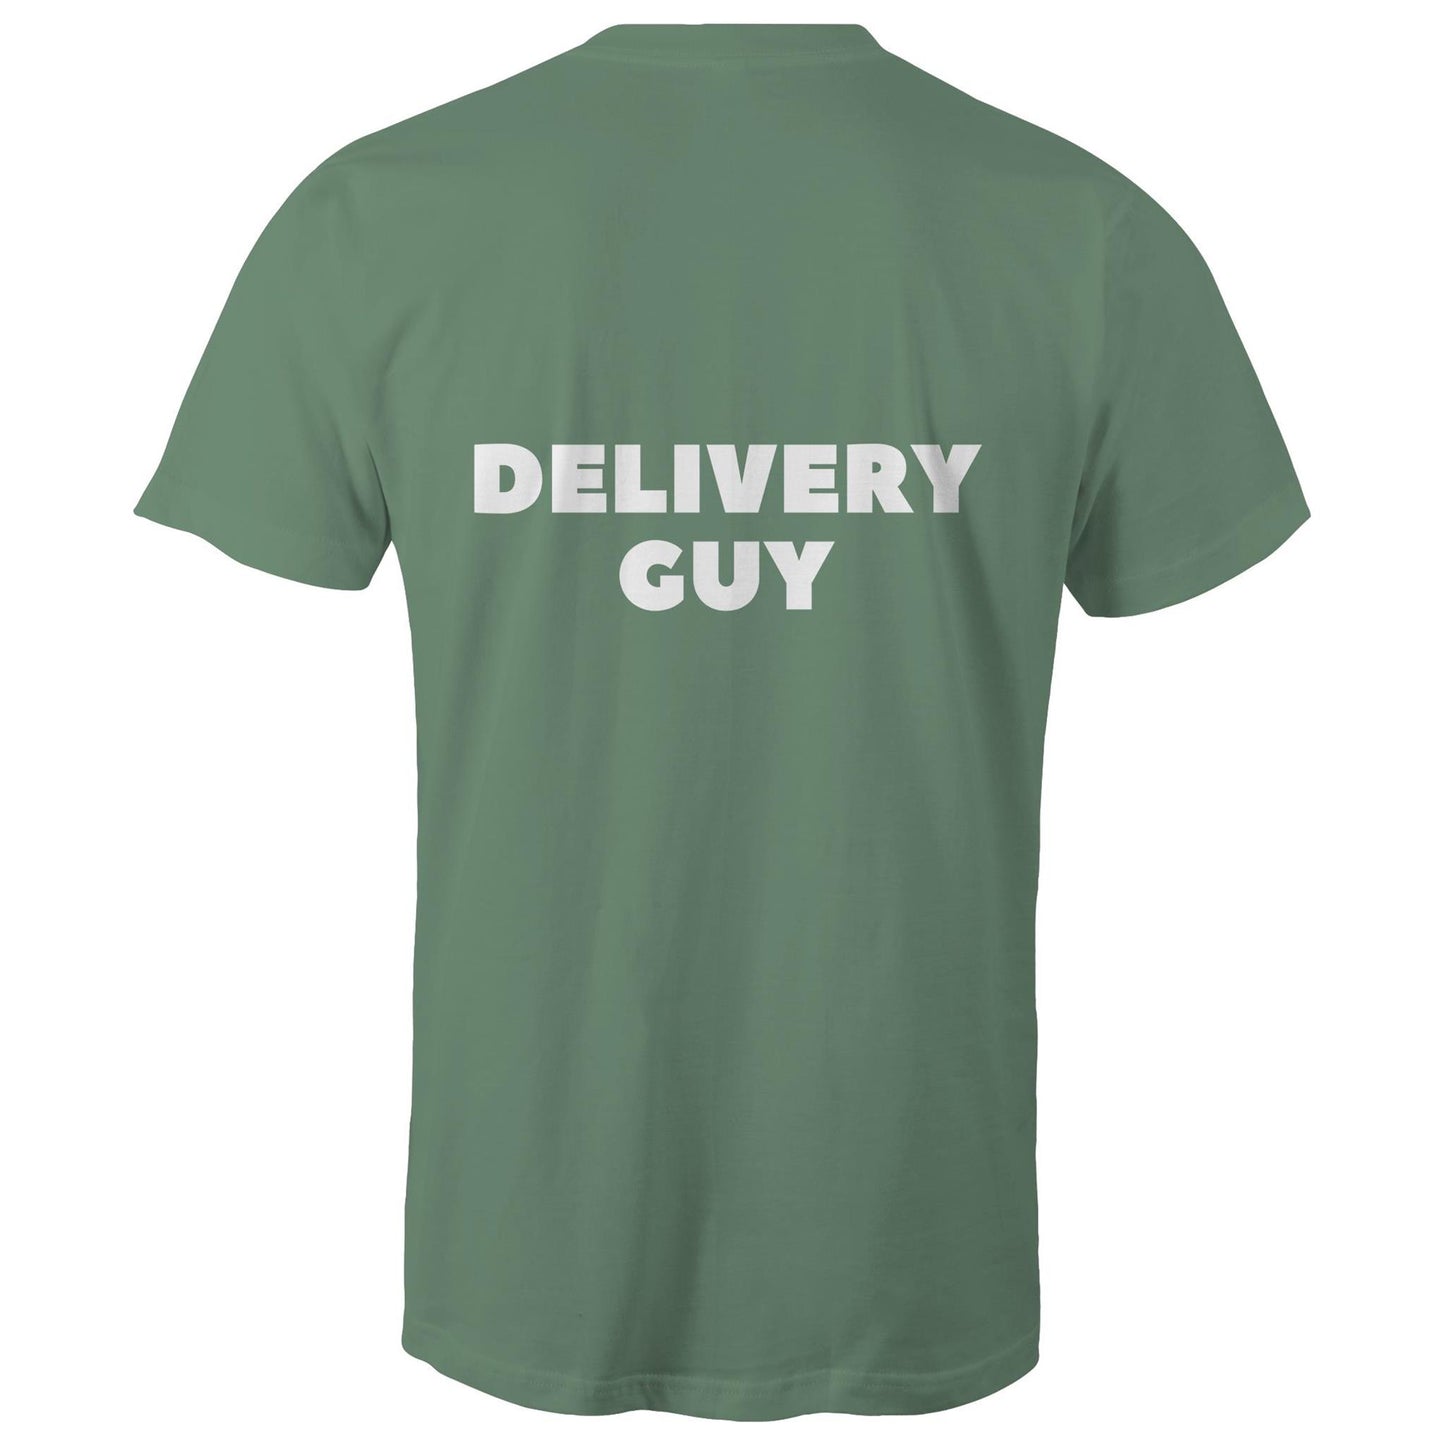 DELIVERY GUY - Mens T-Shirt